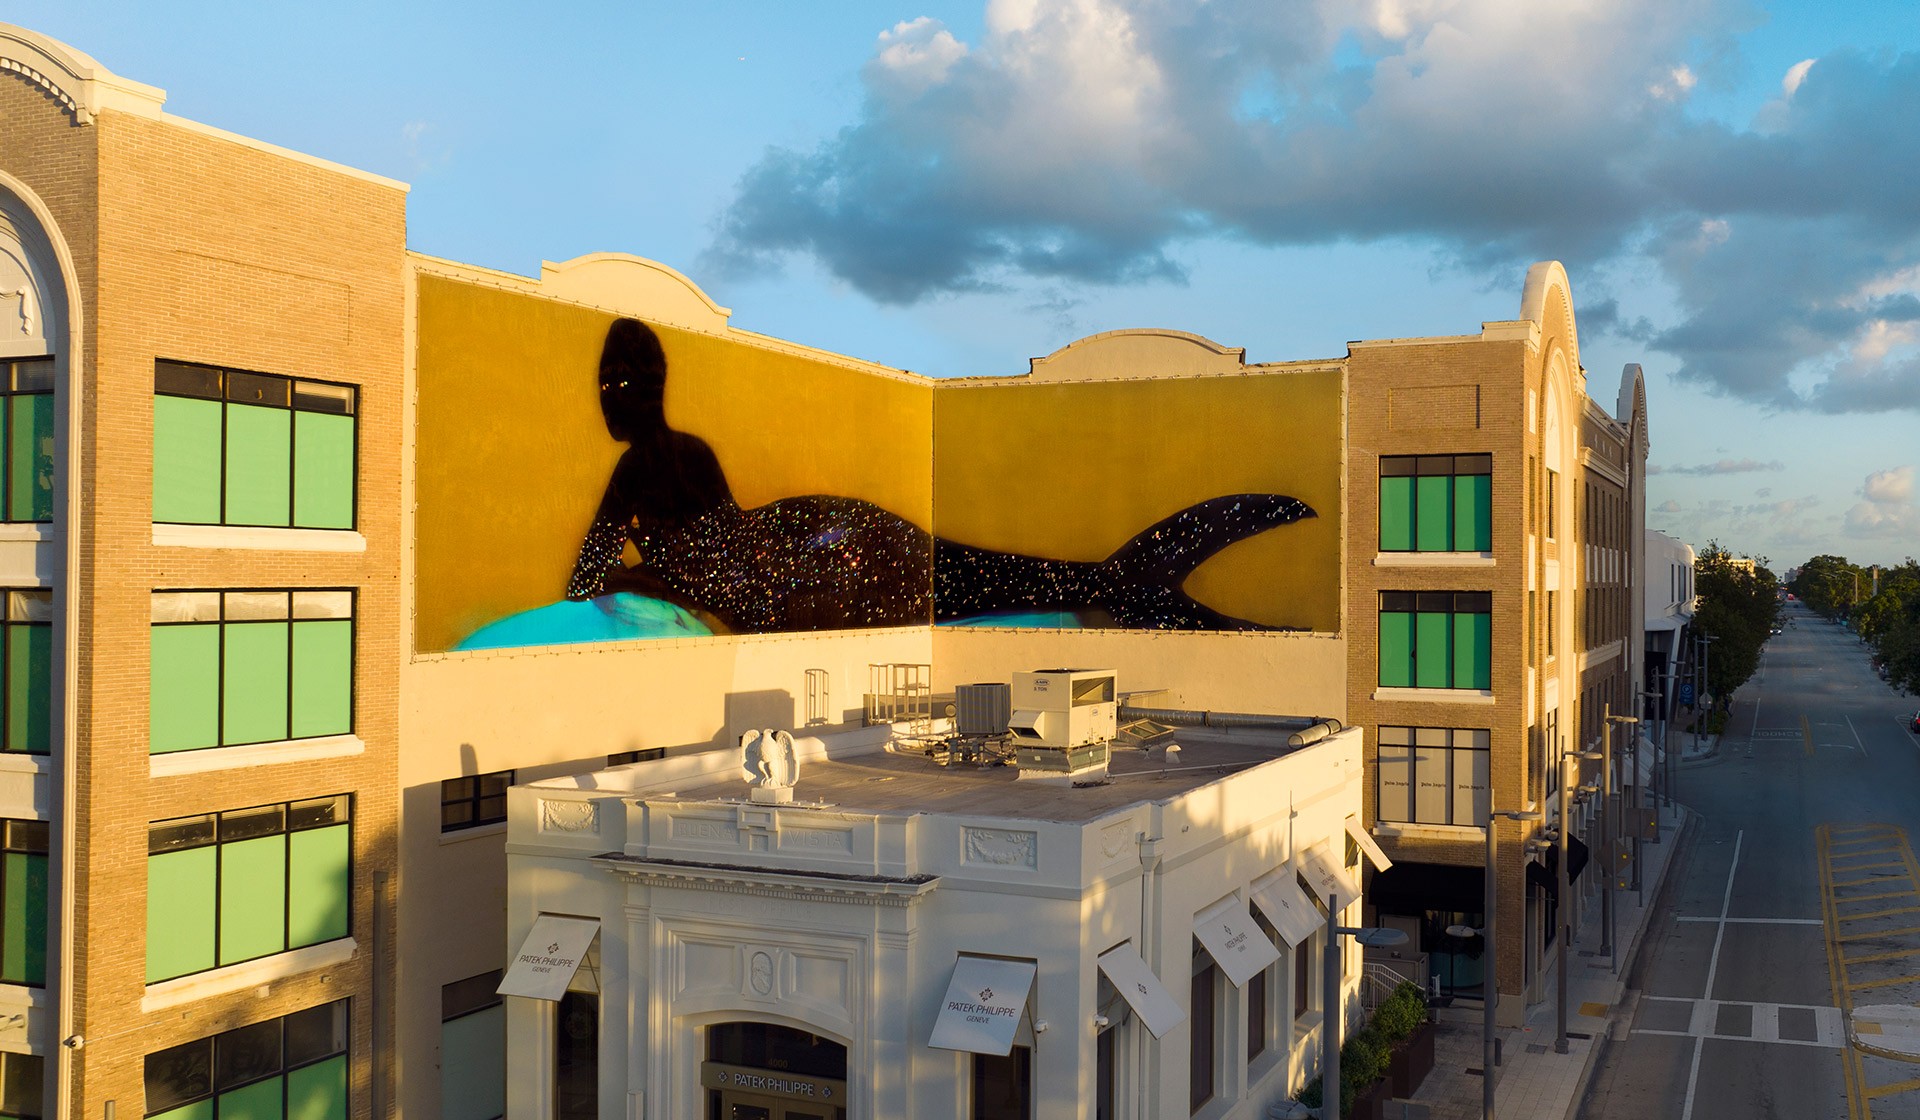 Welcoming the Reclining Mermaid to the District